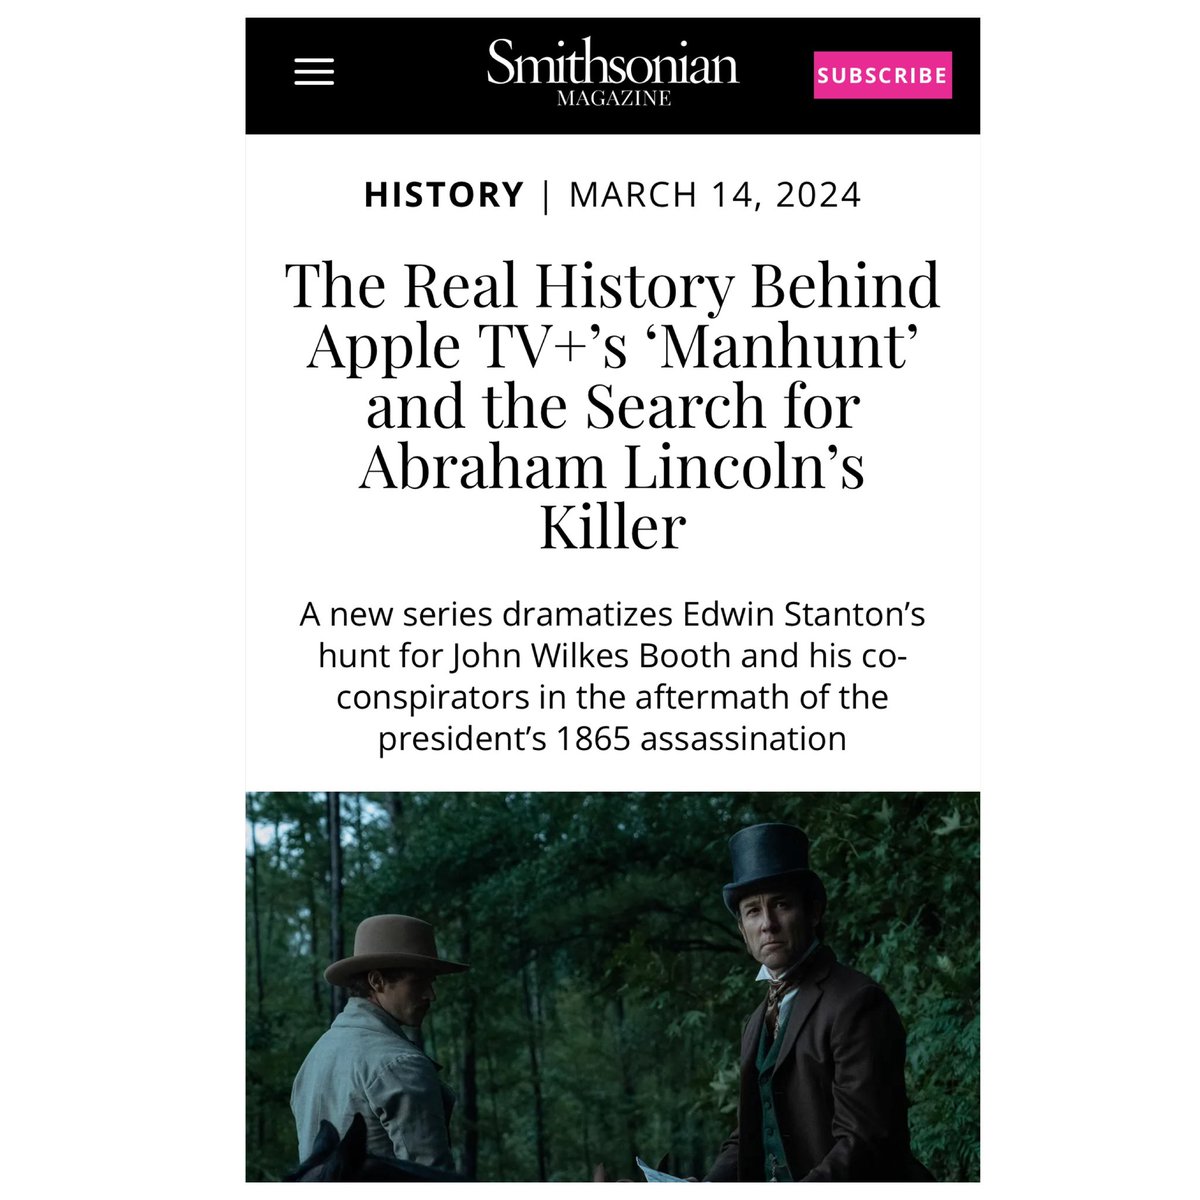 Watching “Manhunt”? This article compares the book, the show, and the real history of the events. Link here: smithsonianmag.com/history/the-re…
•
#manhuntseries #appletv #tobiasmenzies #anthonyboyle #outlandercast #outlanderfans